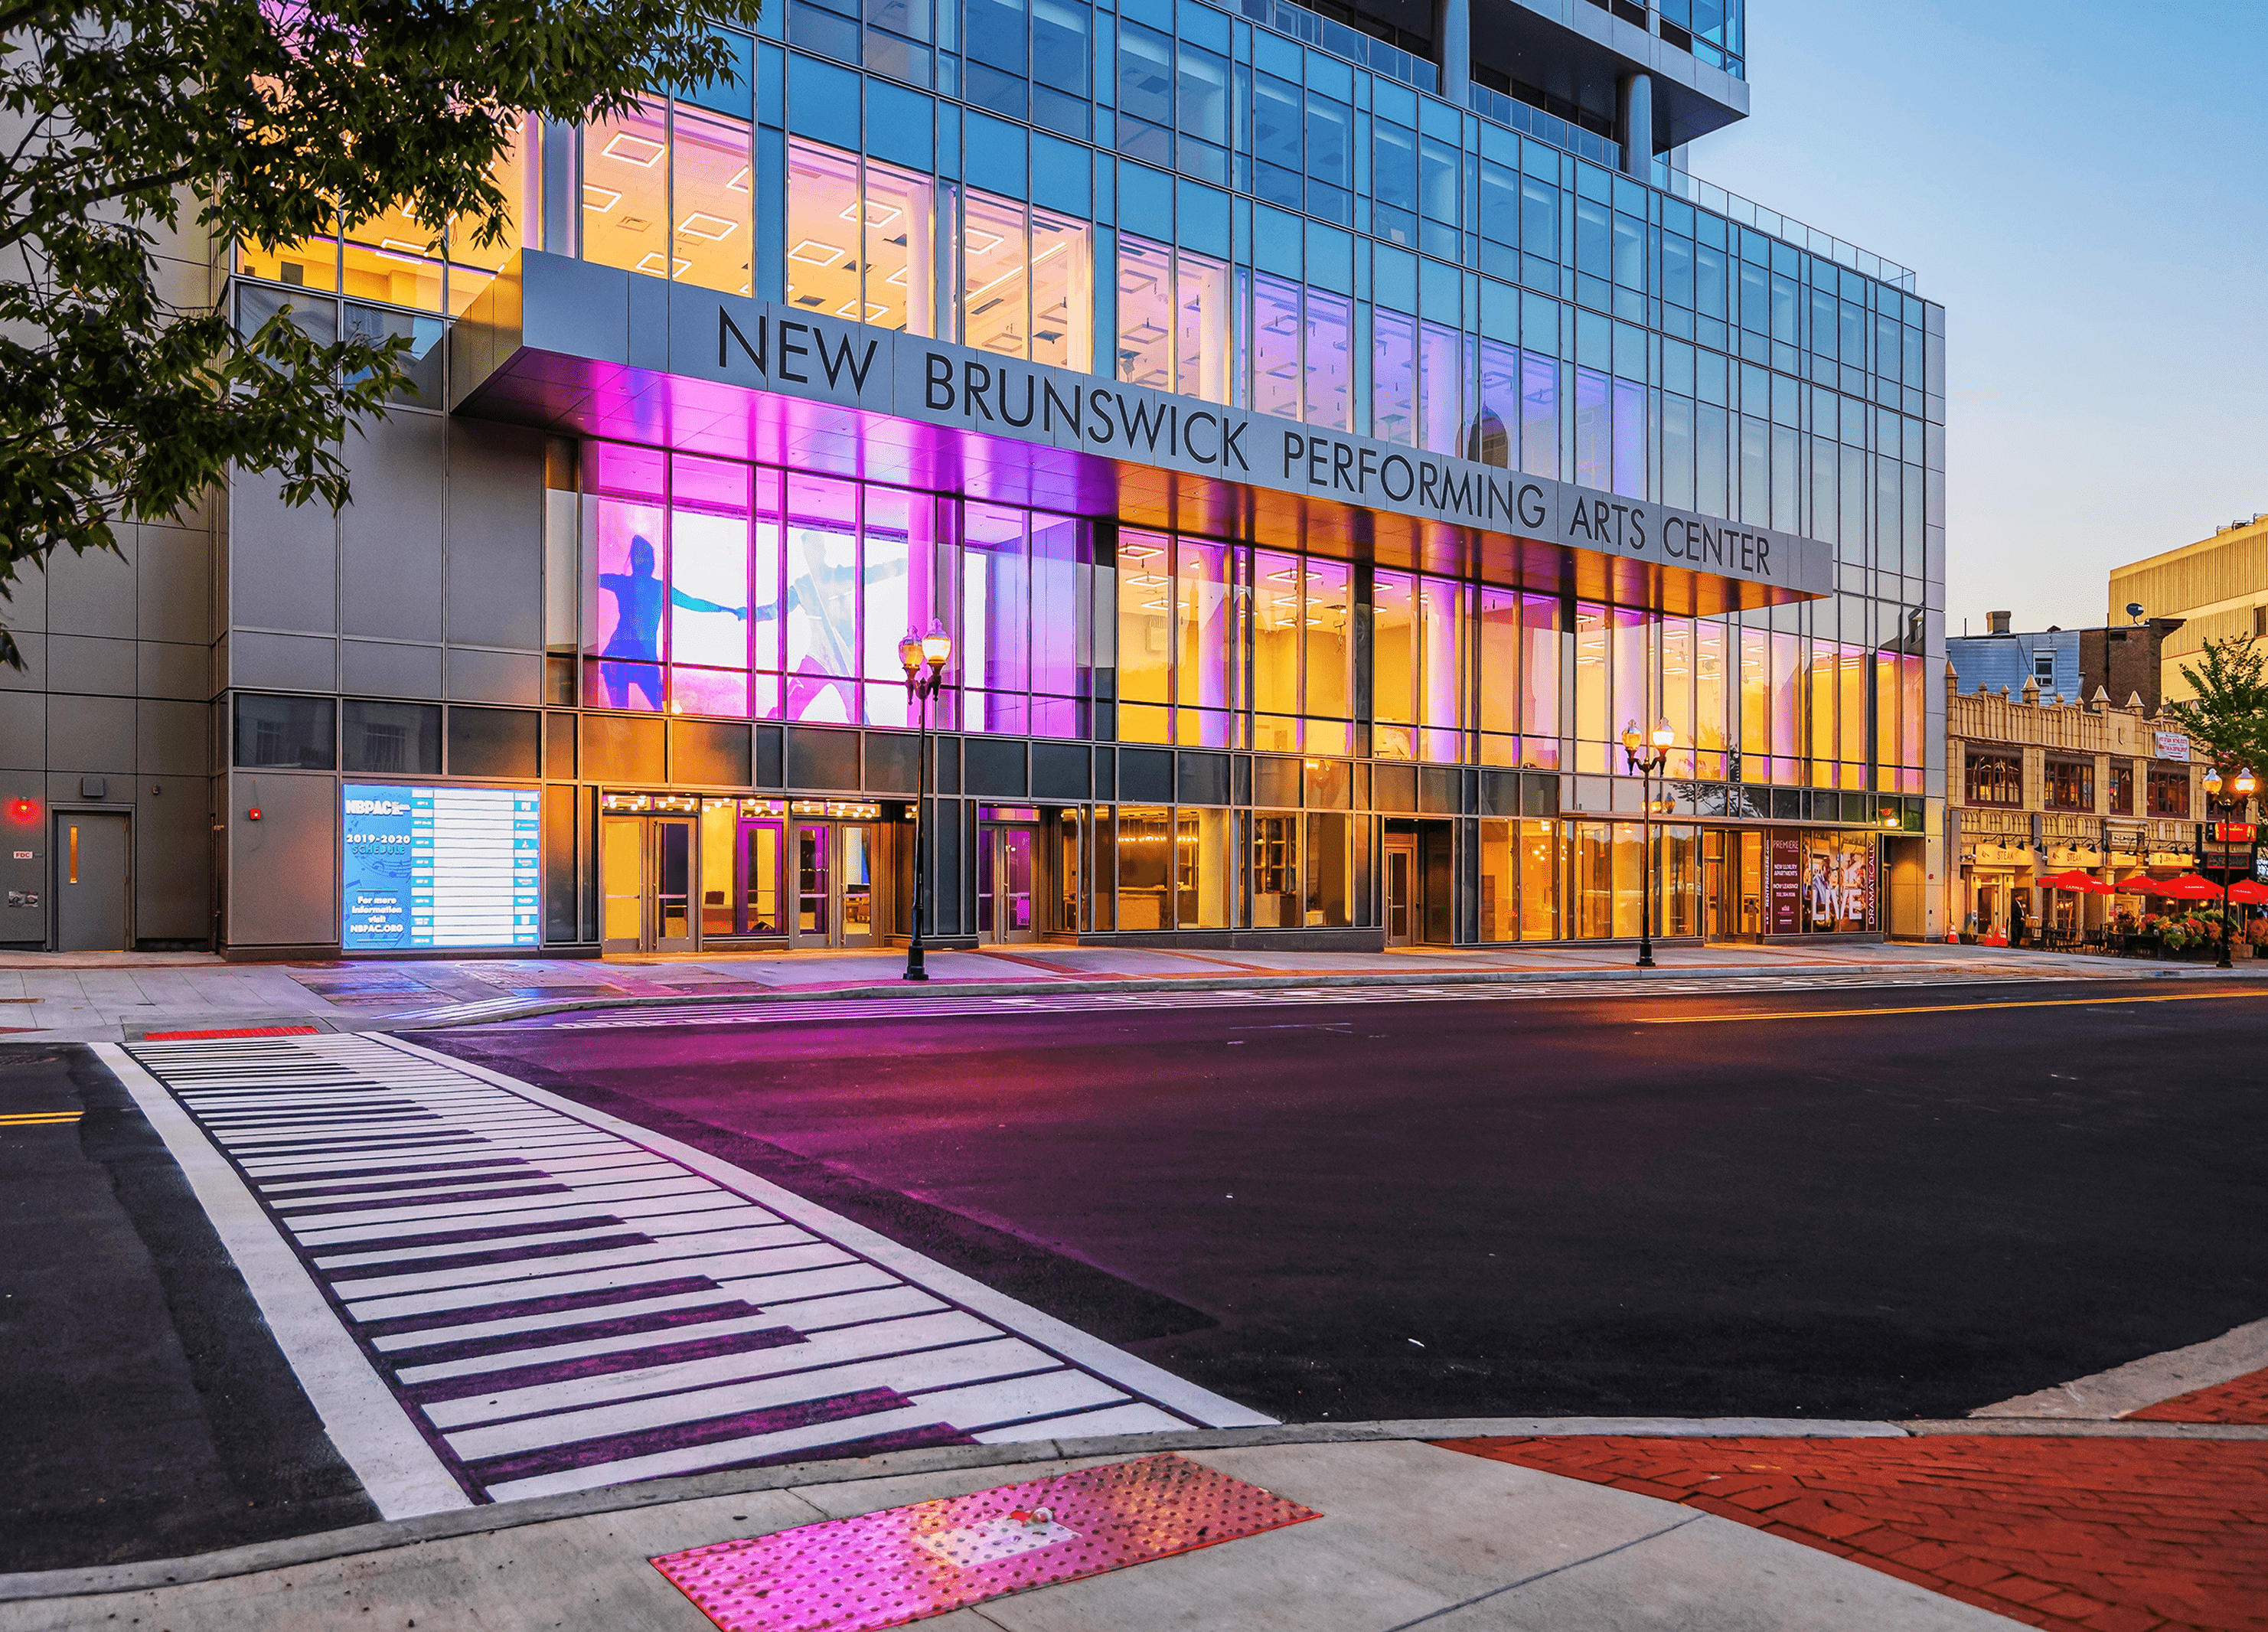 New Brunswick Performing Arts Center (NBPAC) is a state-of-the-art complex and one of the Northeast's premier venues for musical, dance and theatrical performances.